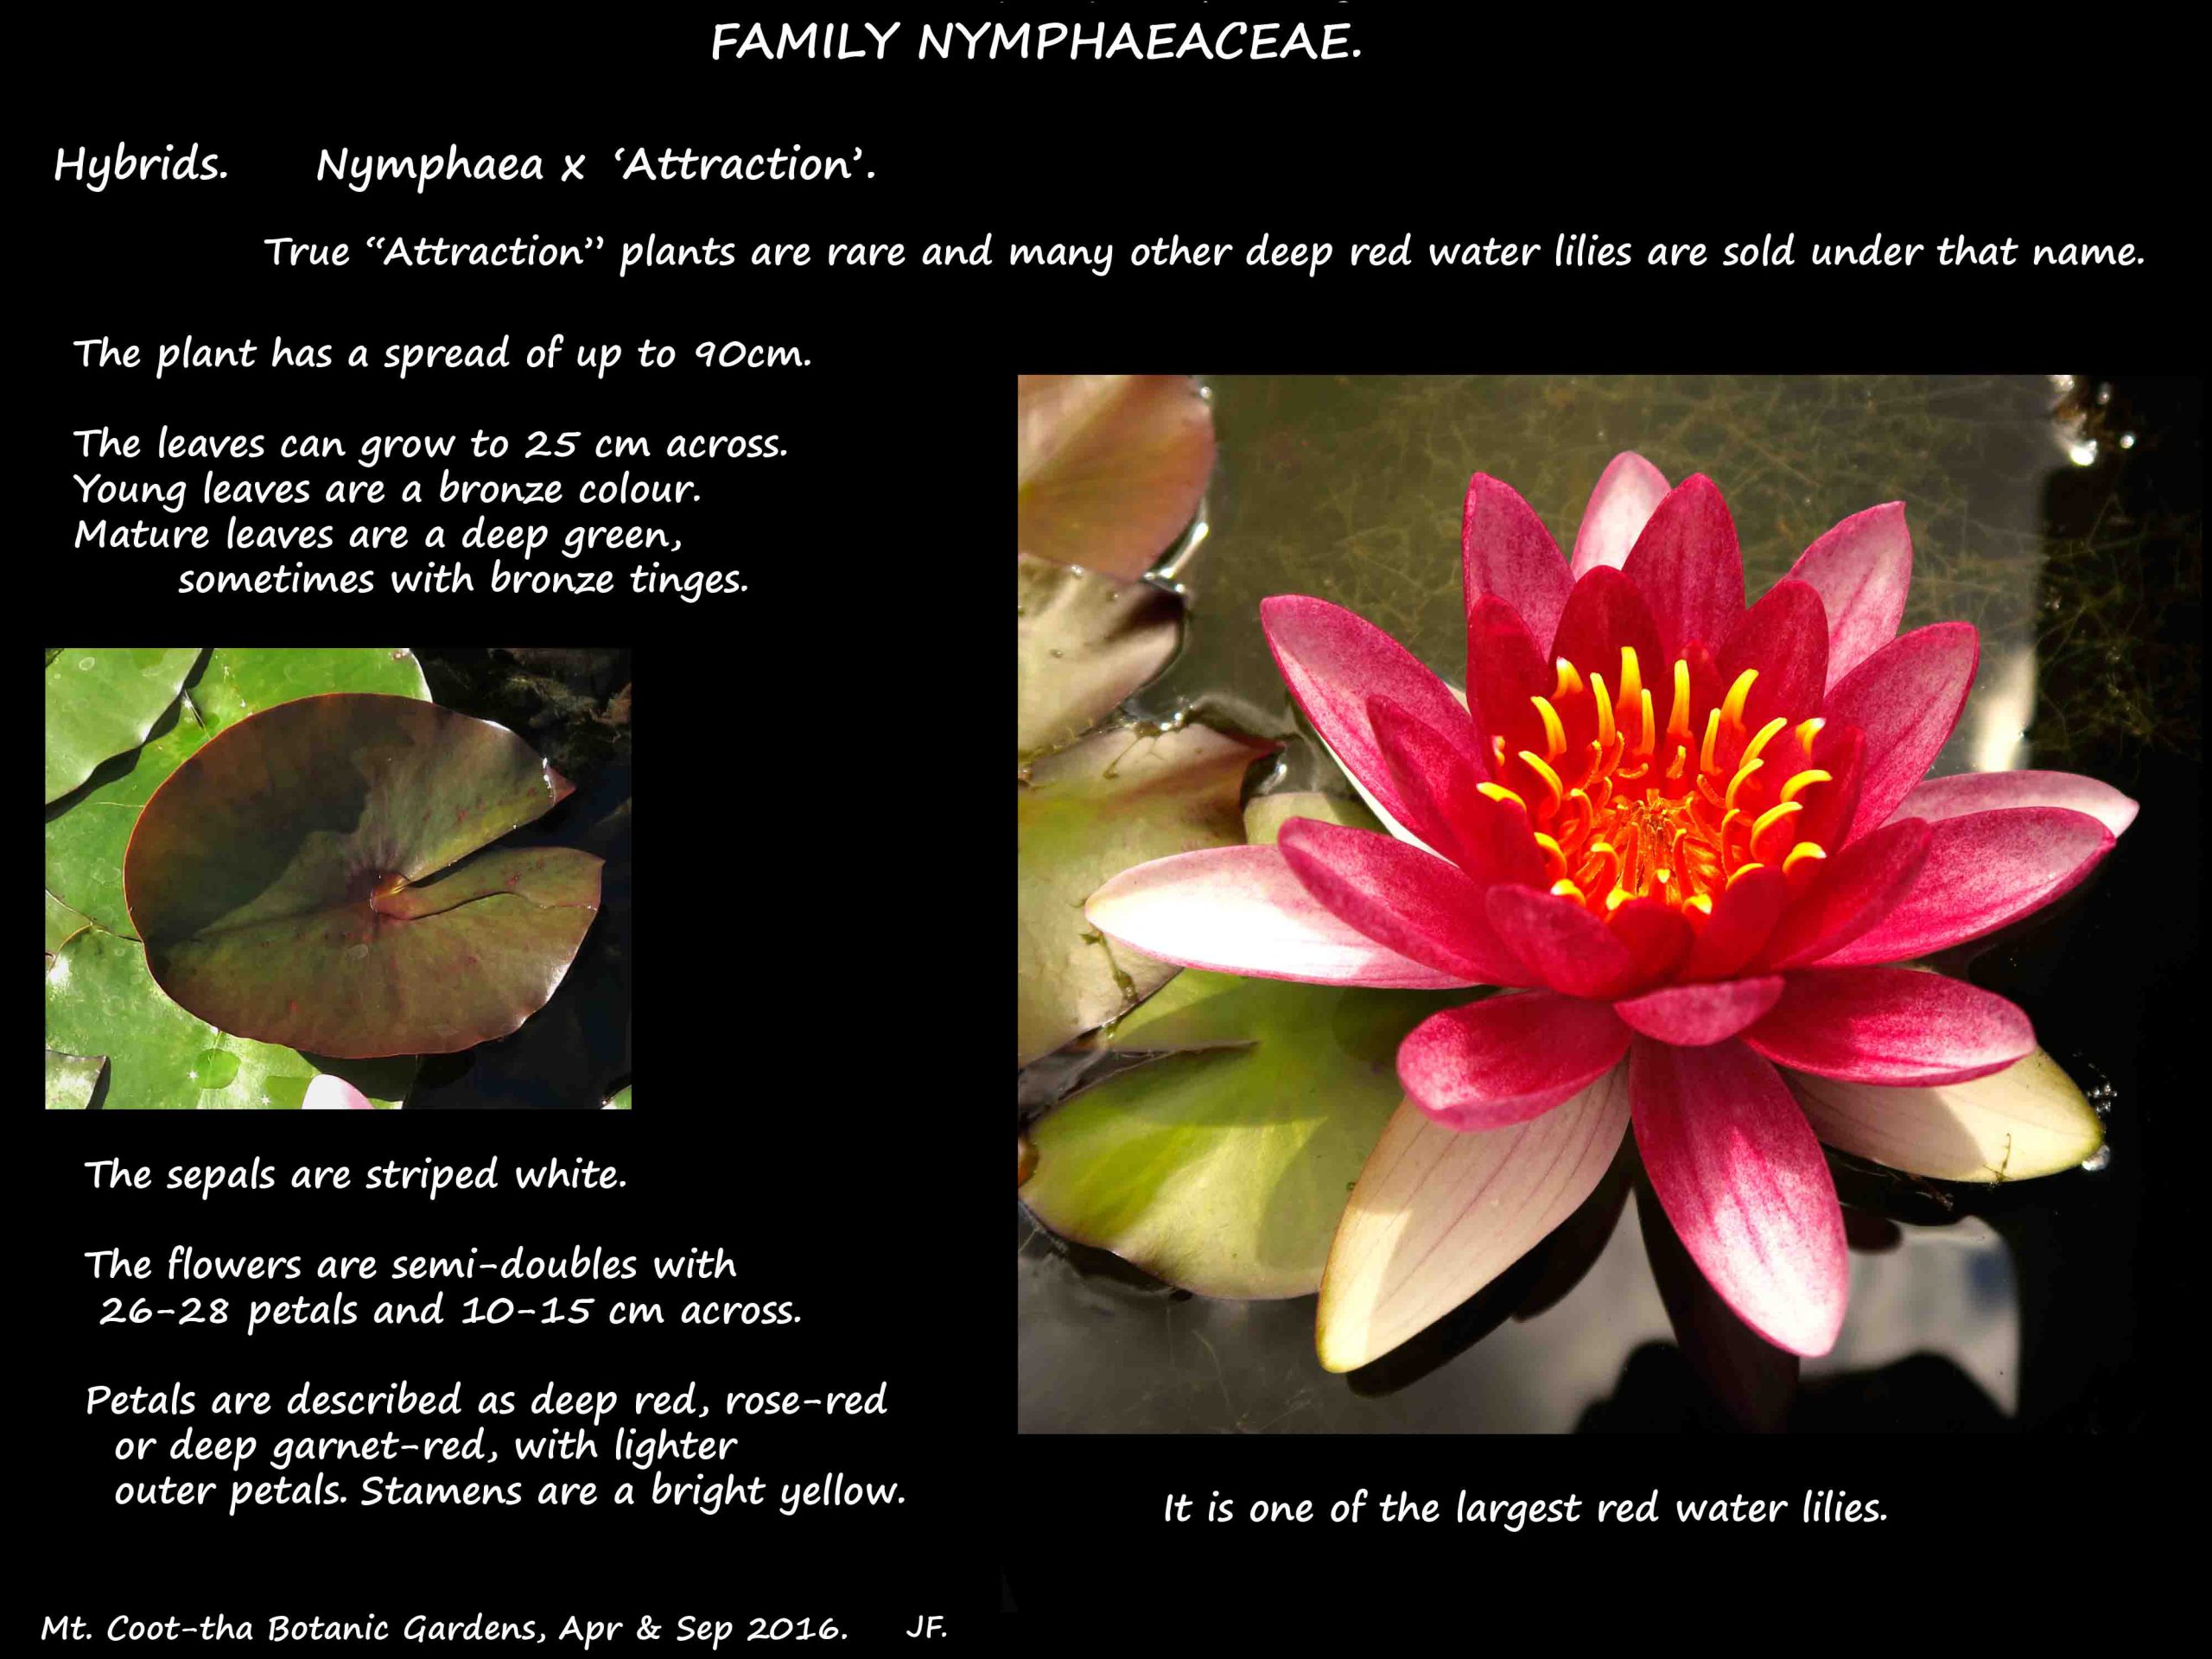 1 Nymphaea Attraction'